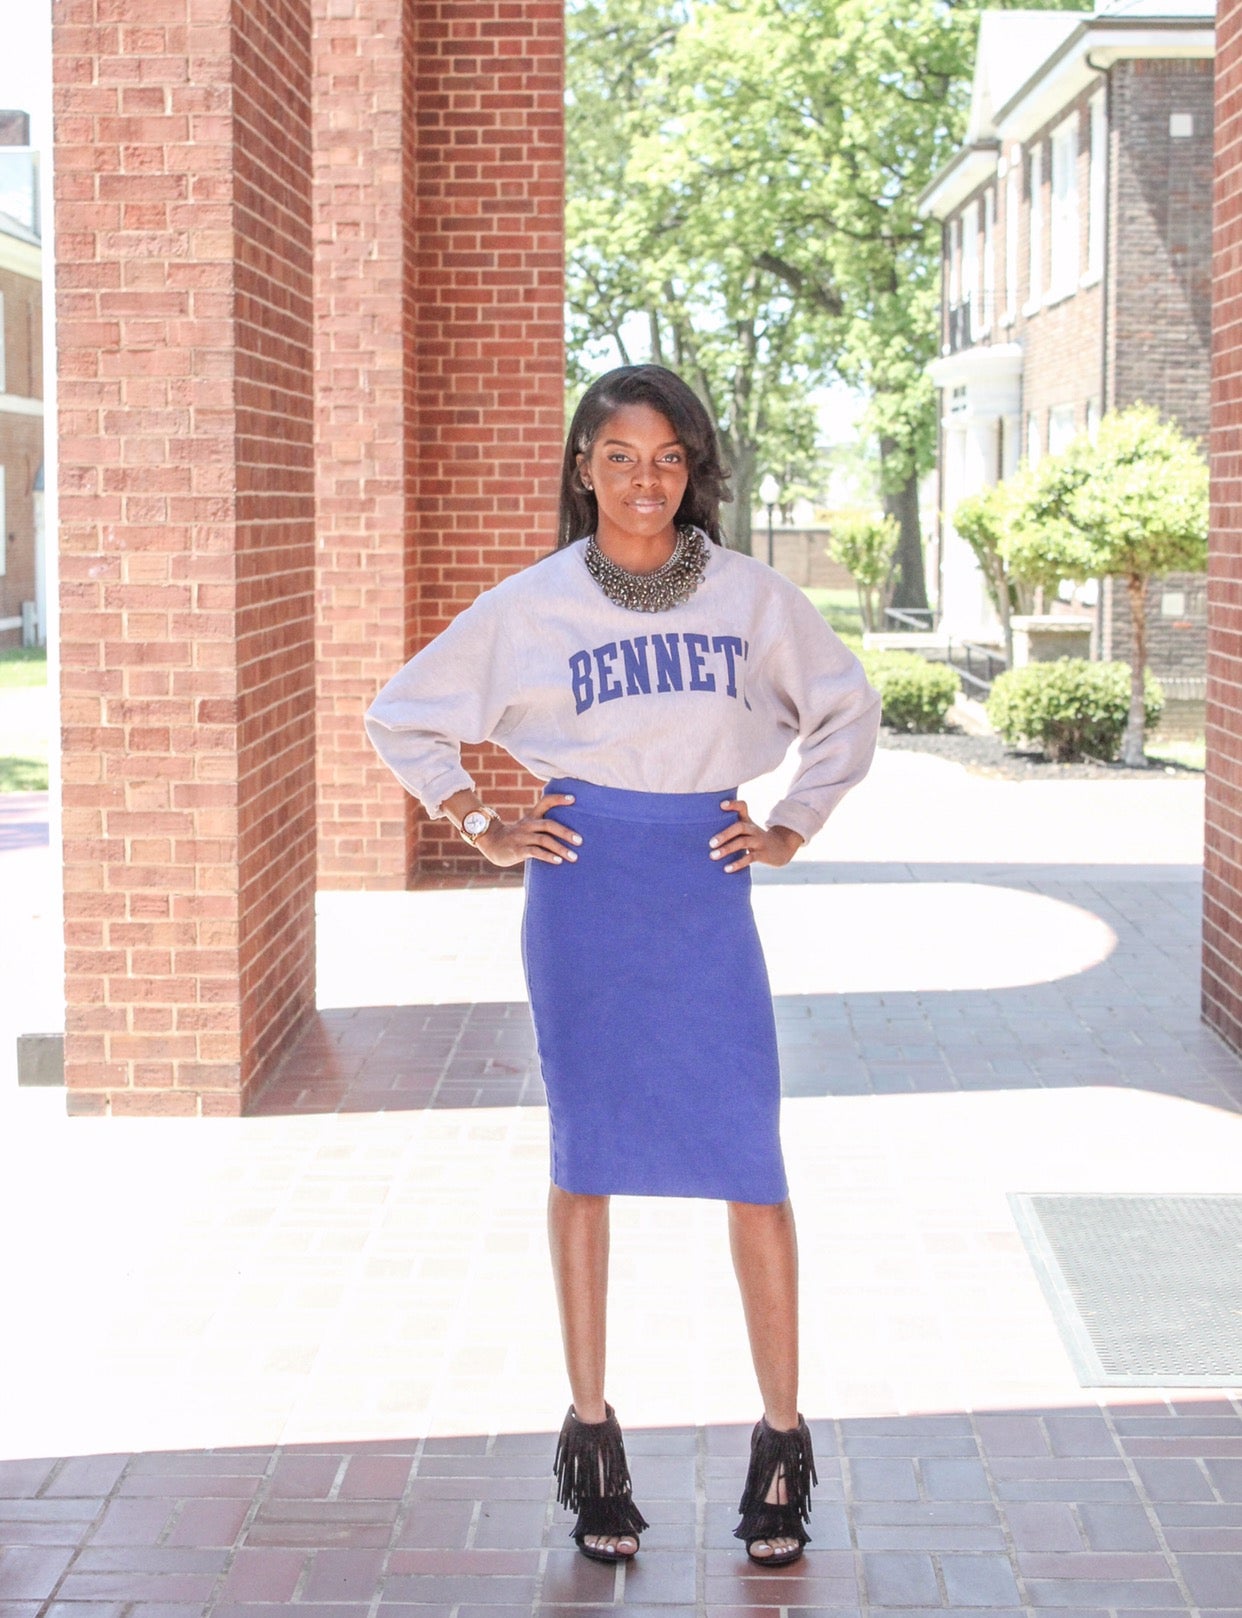 With HBCU Enrollment On The Rise, HBCU Graduates Share How The Experience Is Incomparable